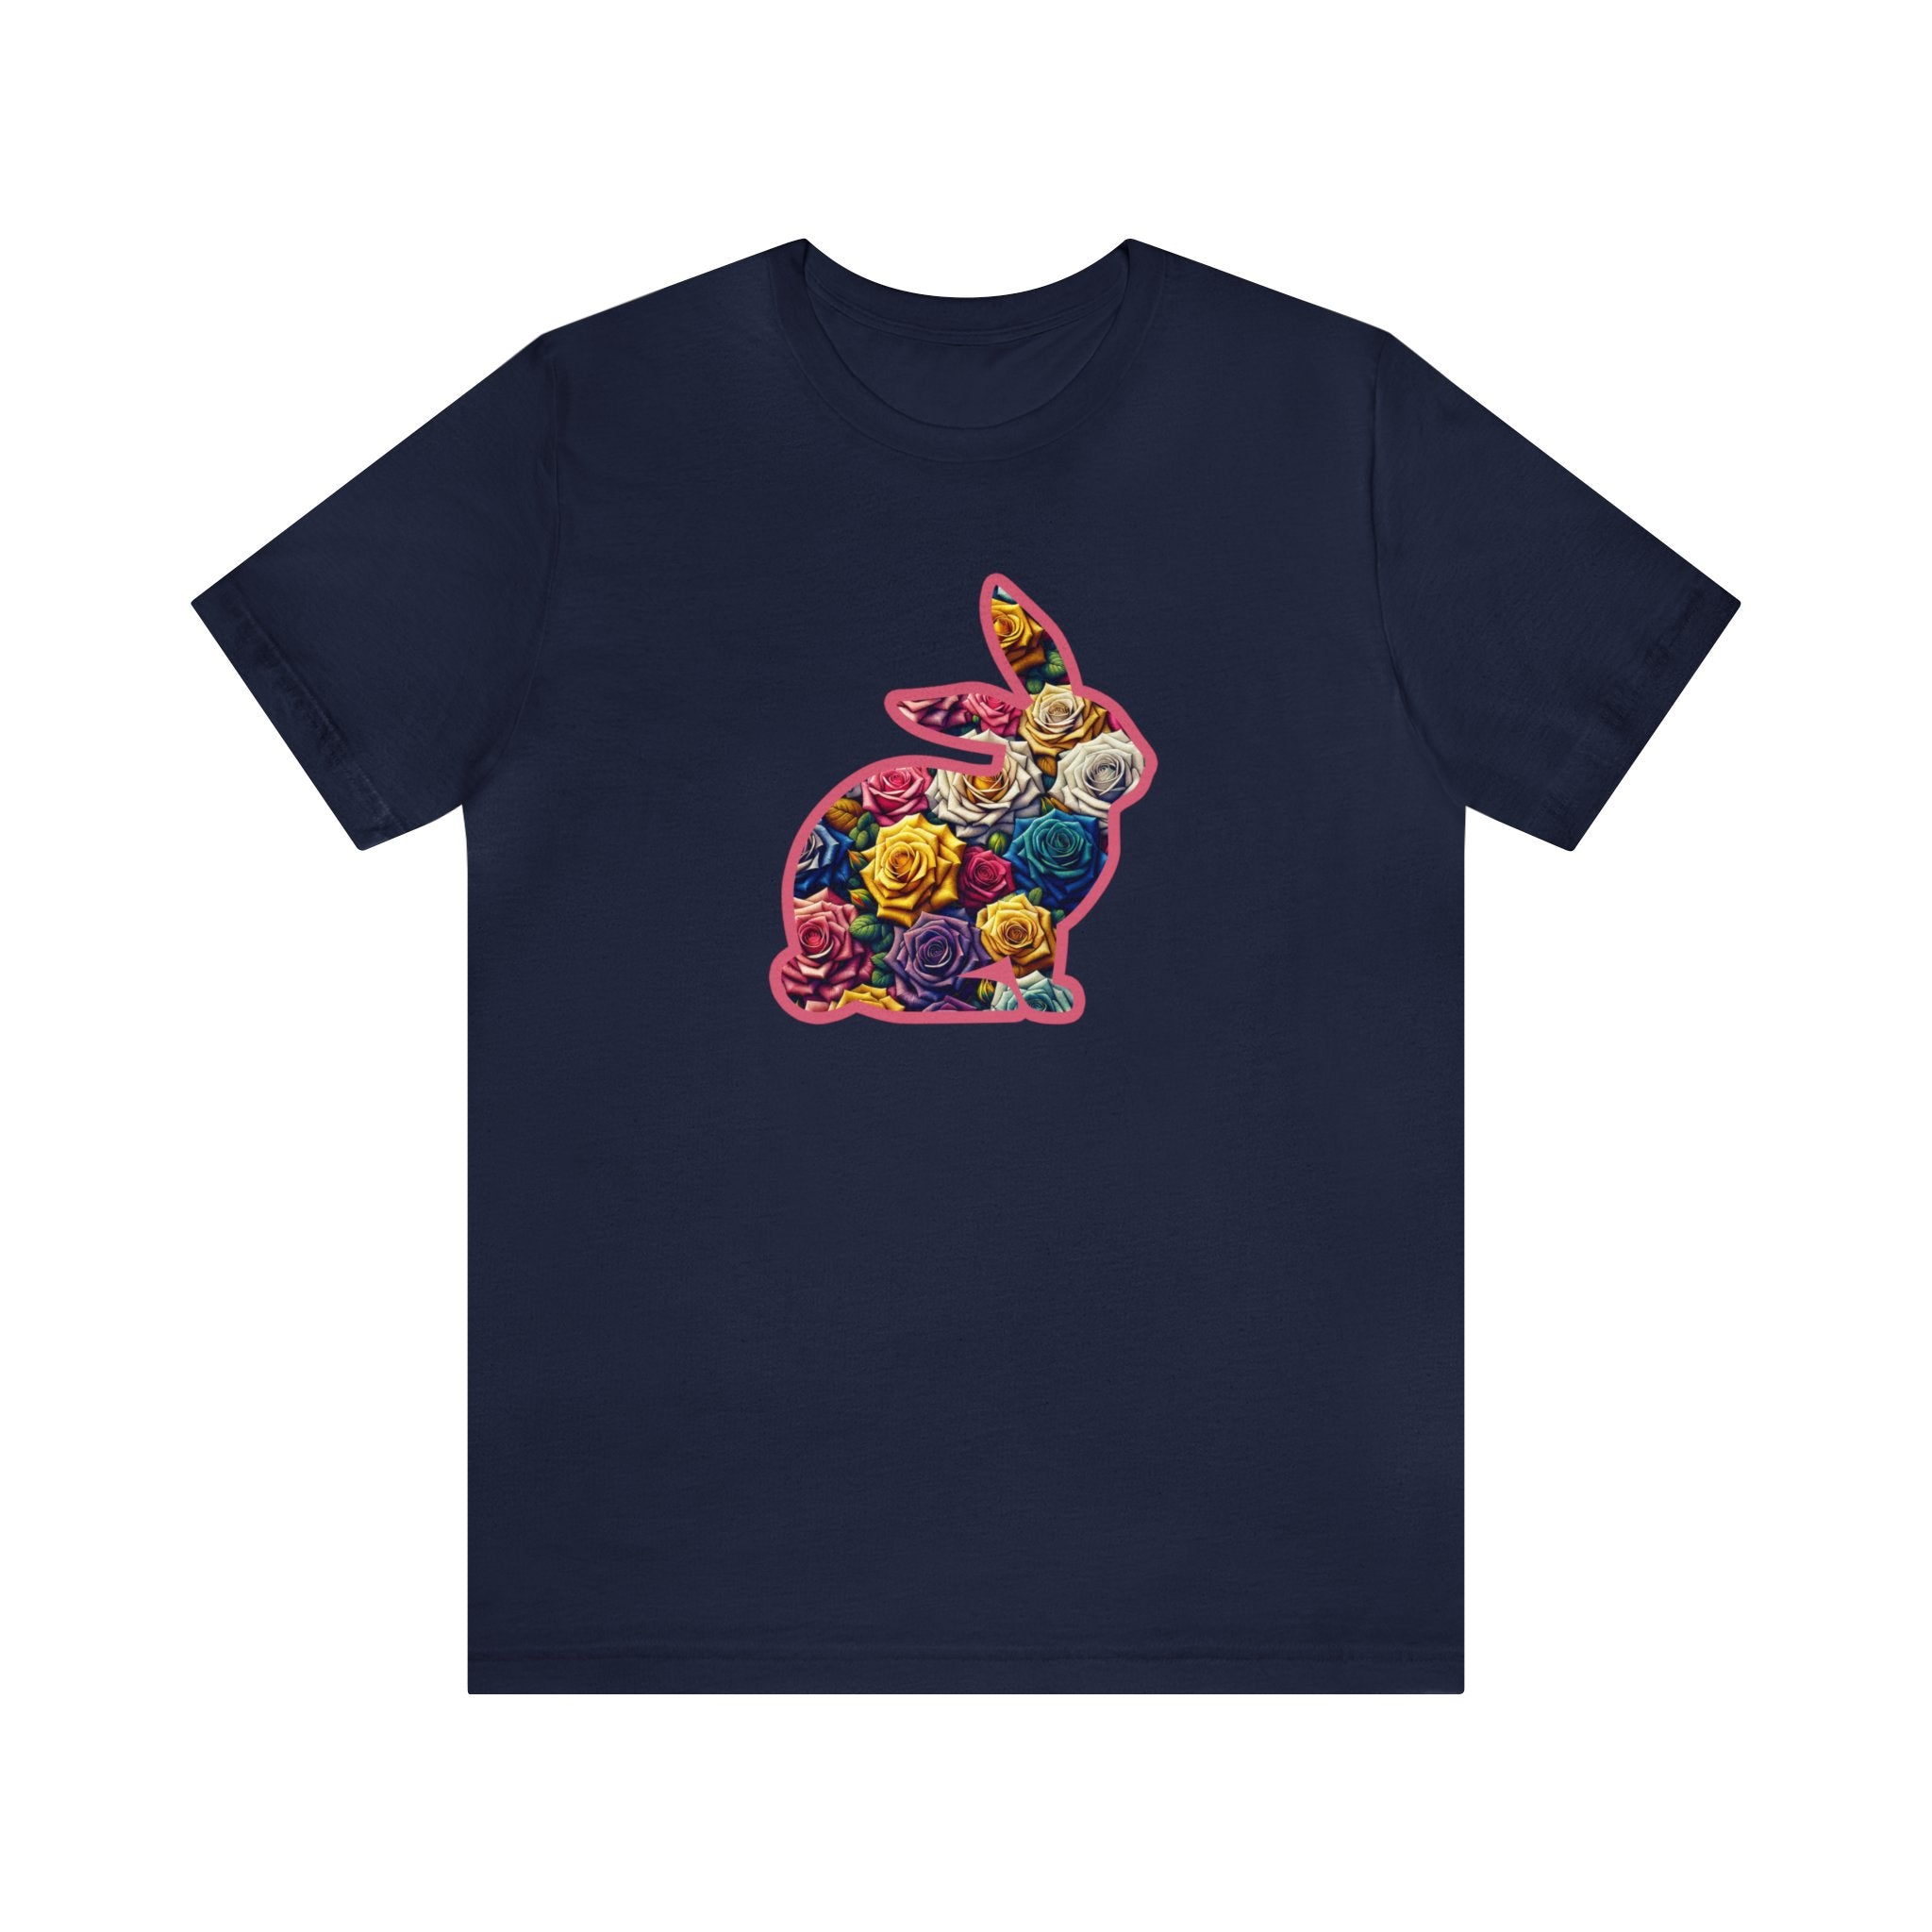 Easter Bunny Floral Multicolored Roses T-Shirt - Women's Easter Tee